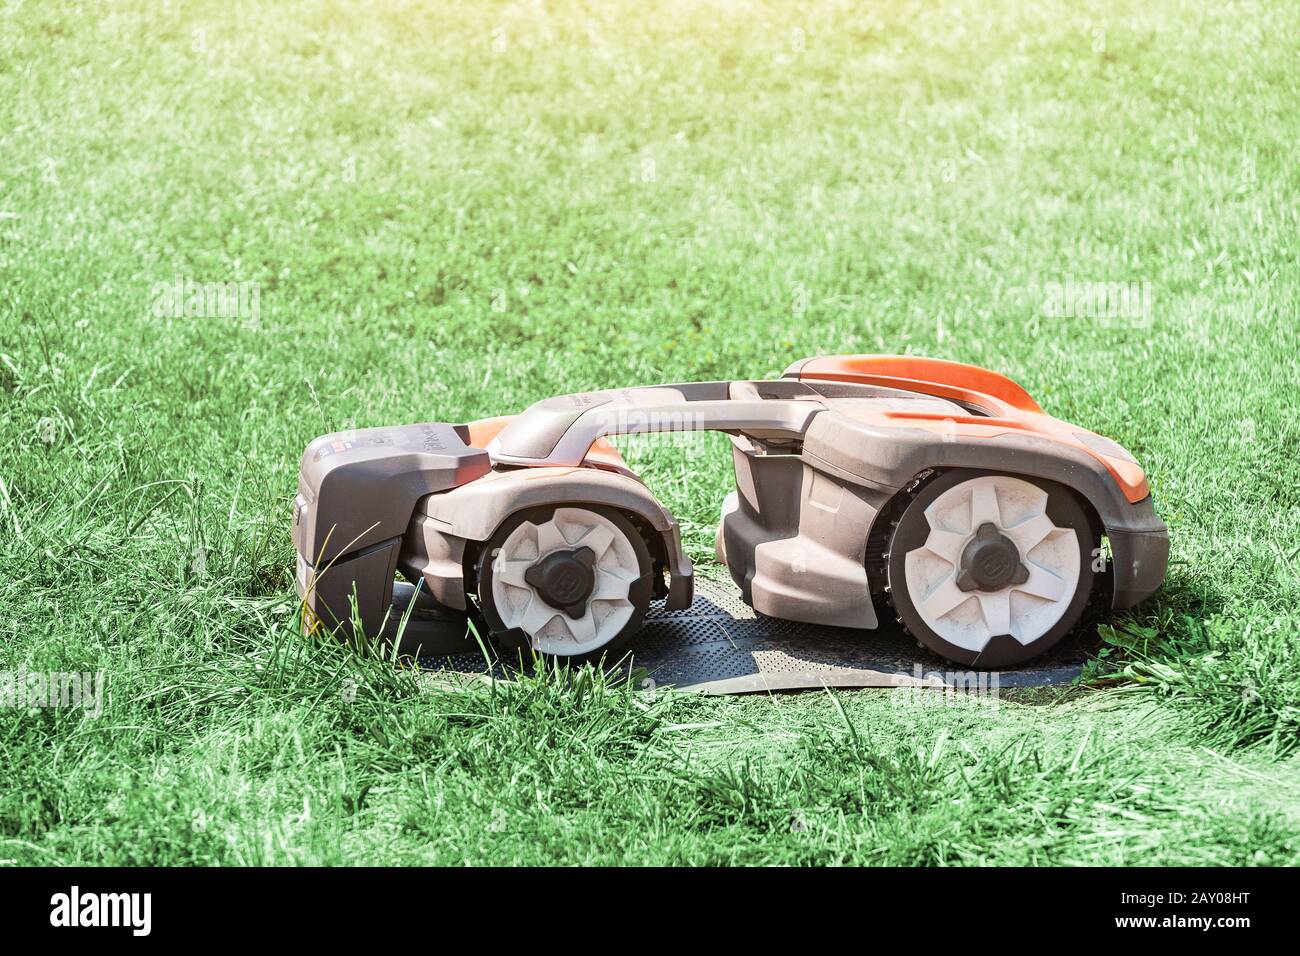 20 July 2019, Vienna, Austria: Robot automatic lawn mower working on a grass. Stock Photo